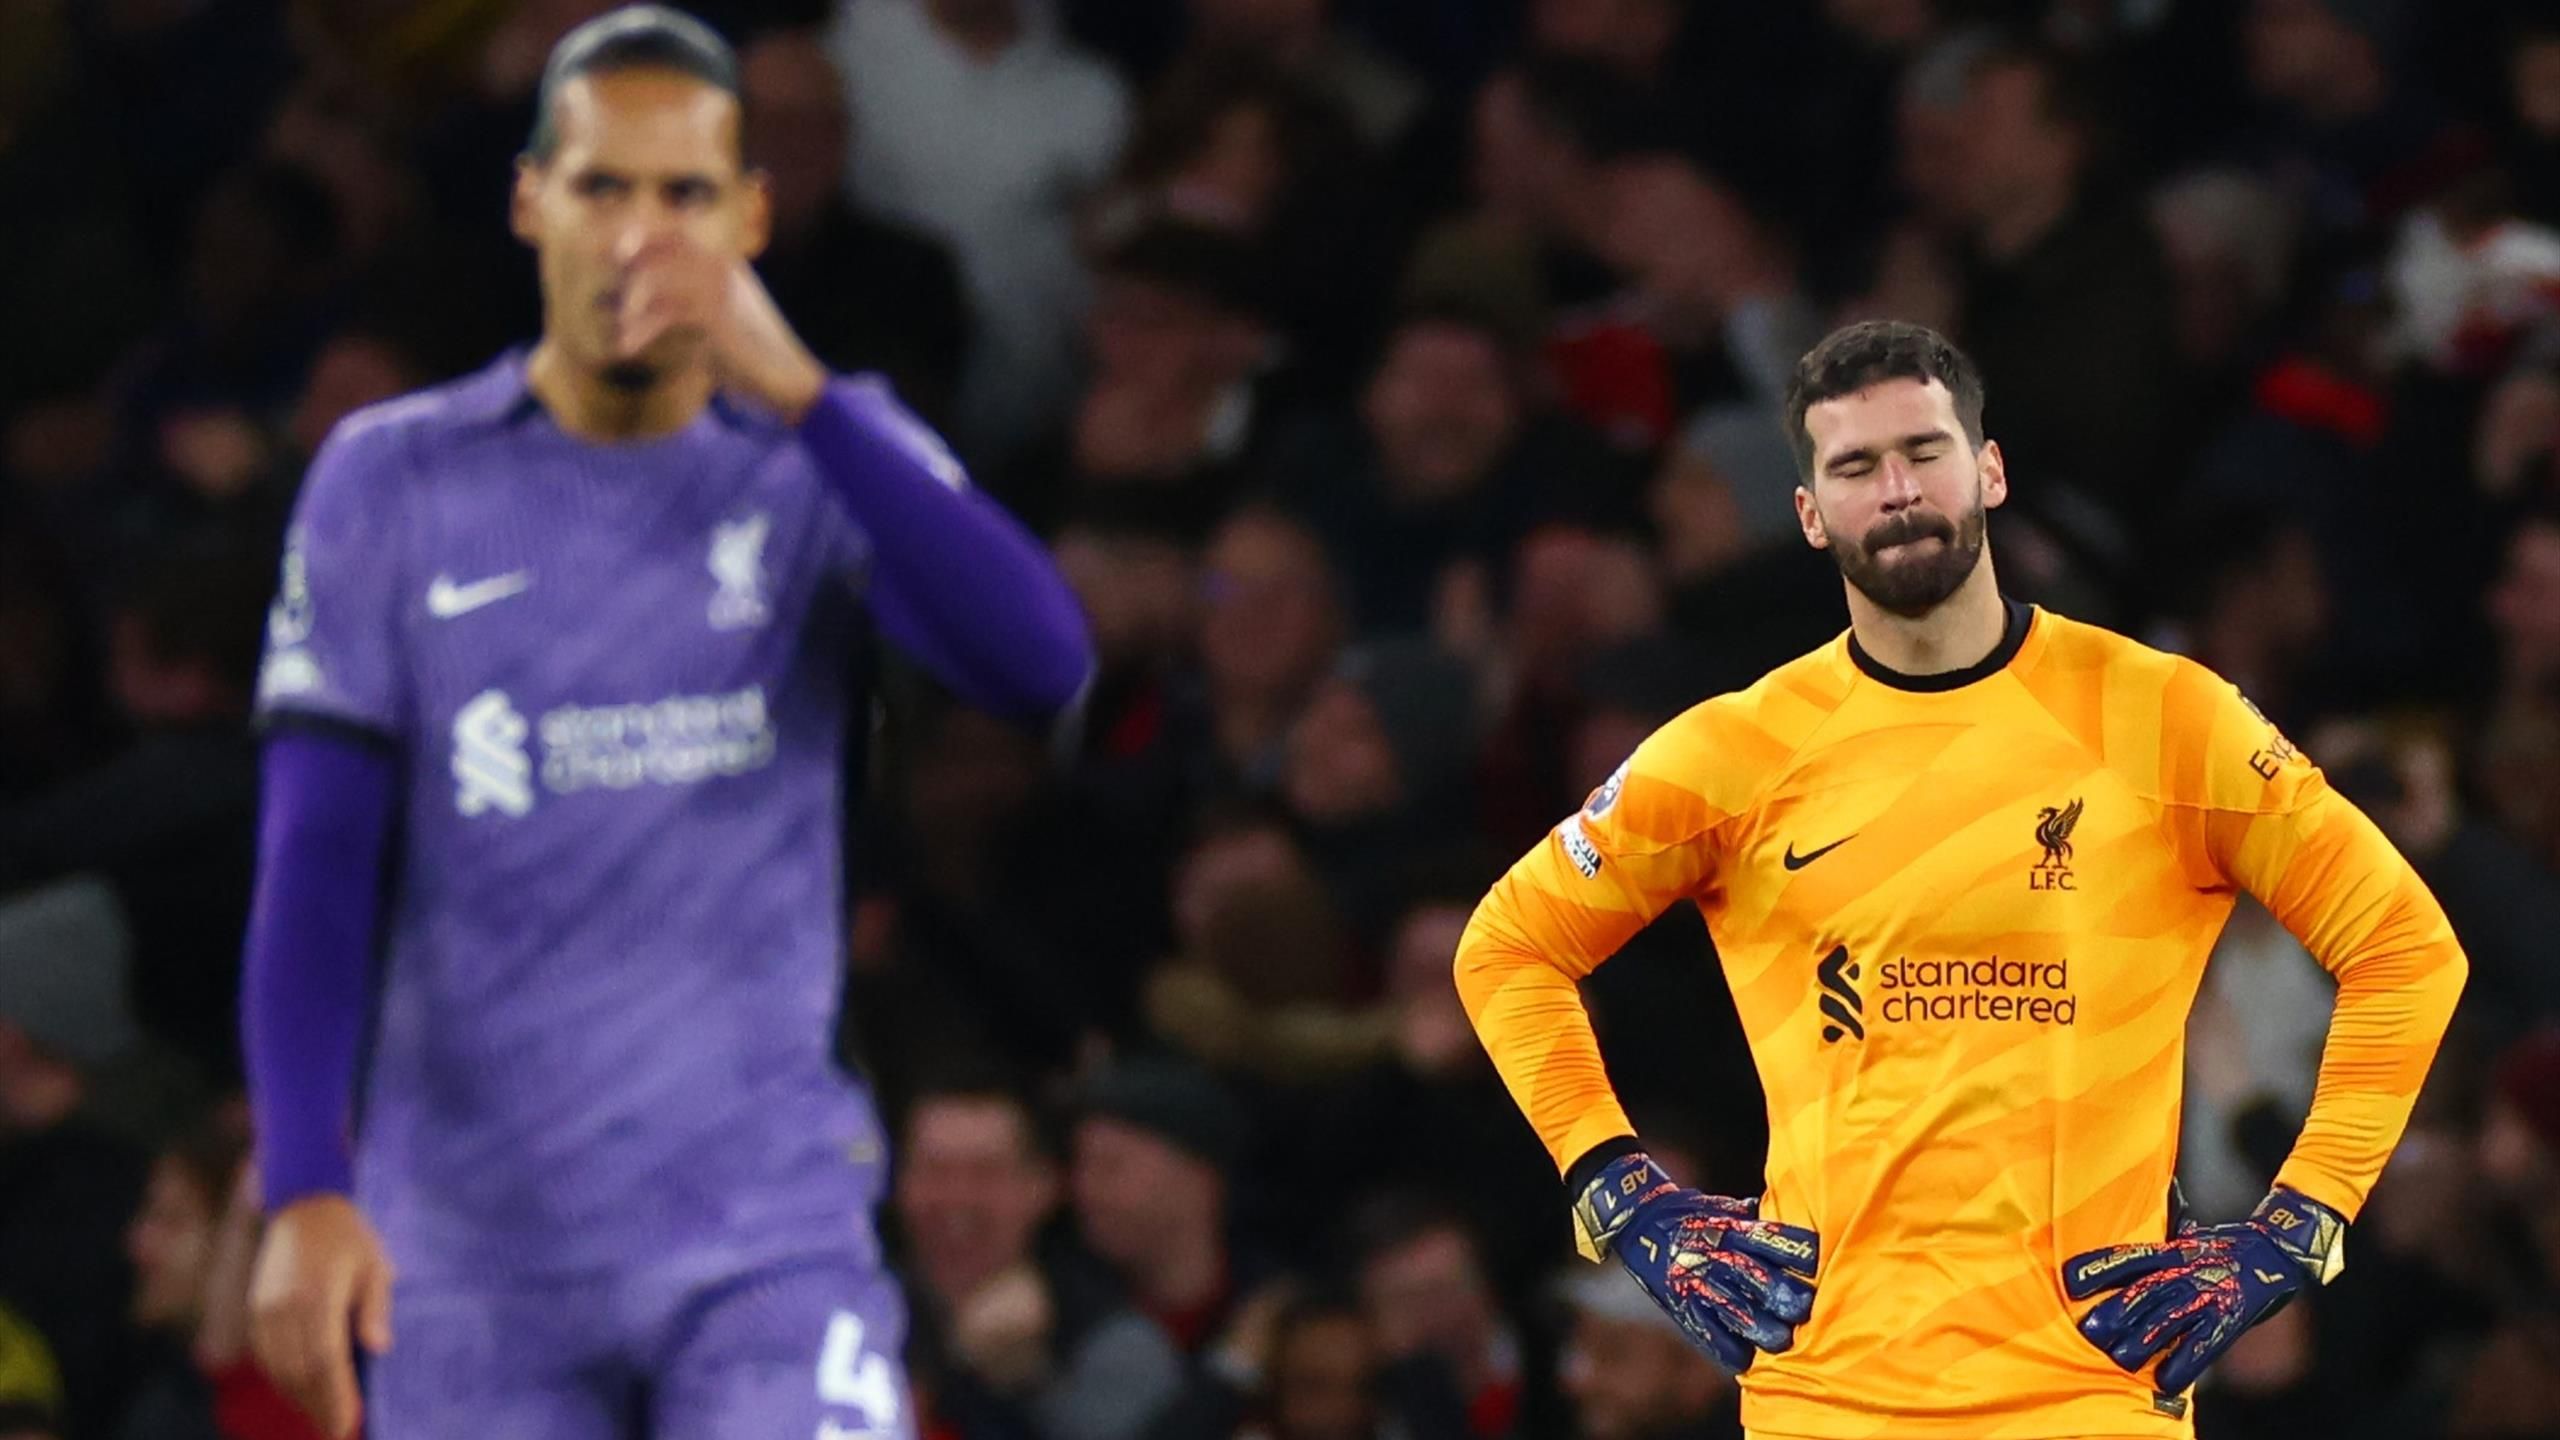 Three things stood out in Arsenal-Liverpool: the straying of Alisson Becker and Virgil van Dijk